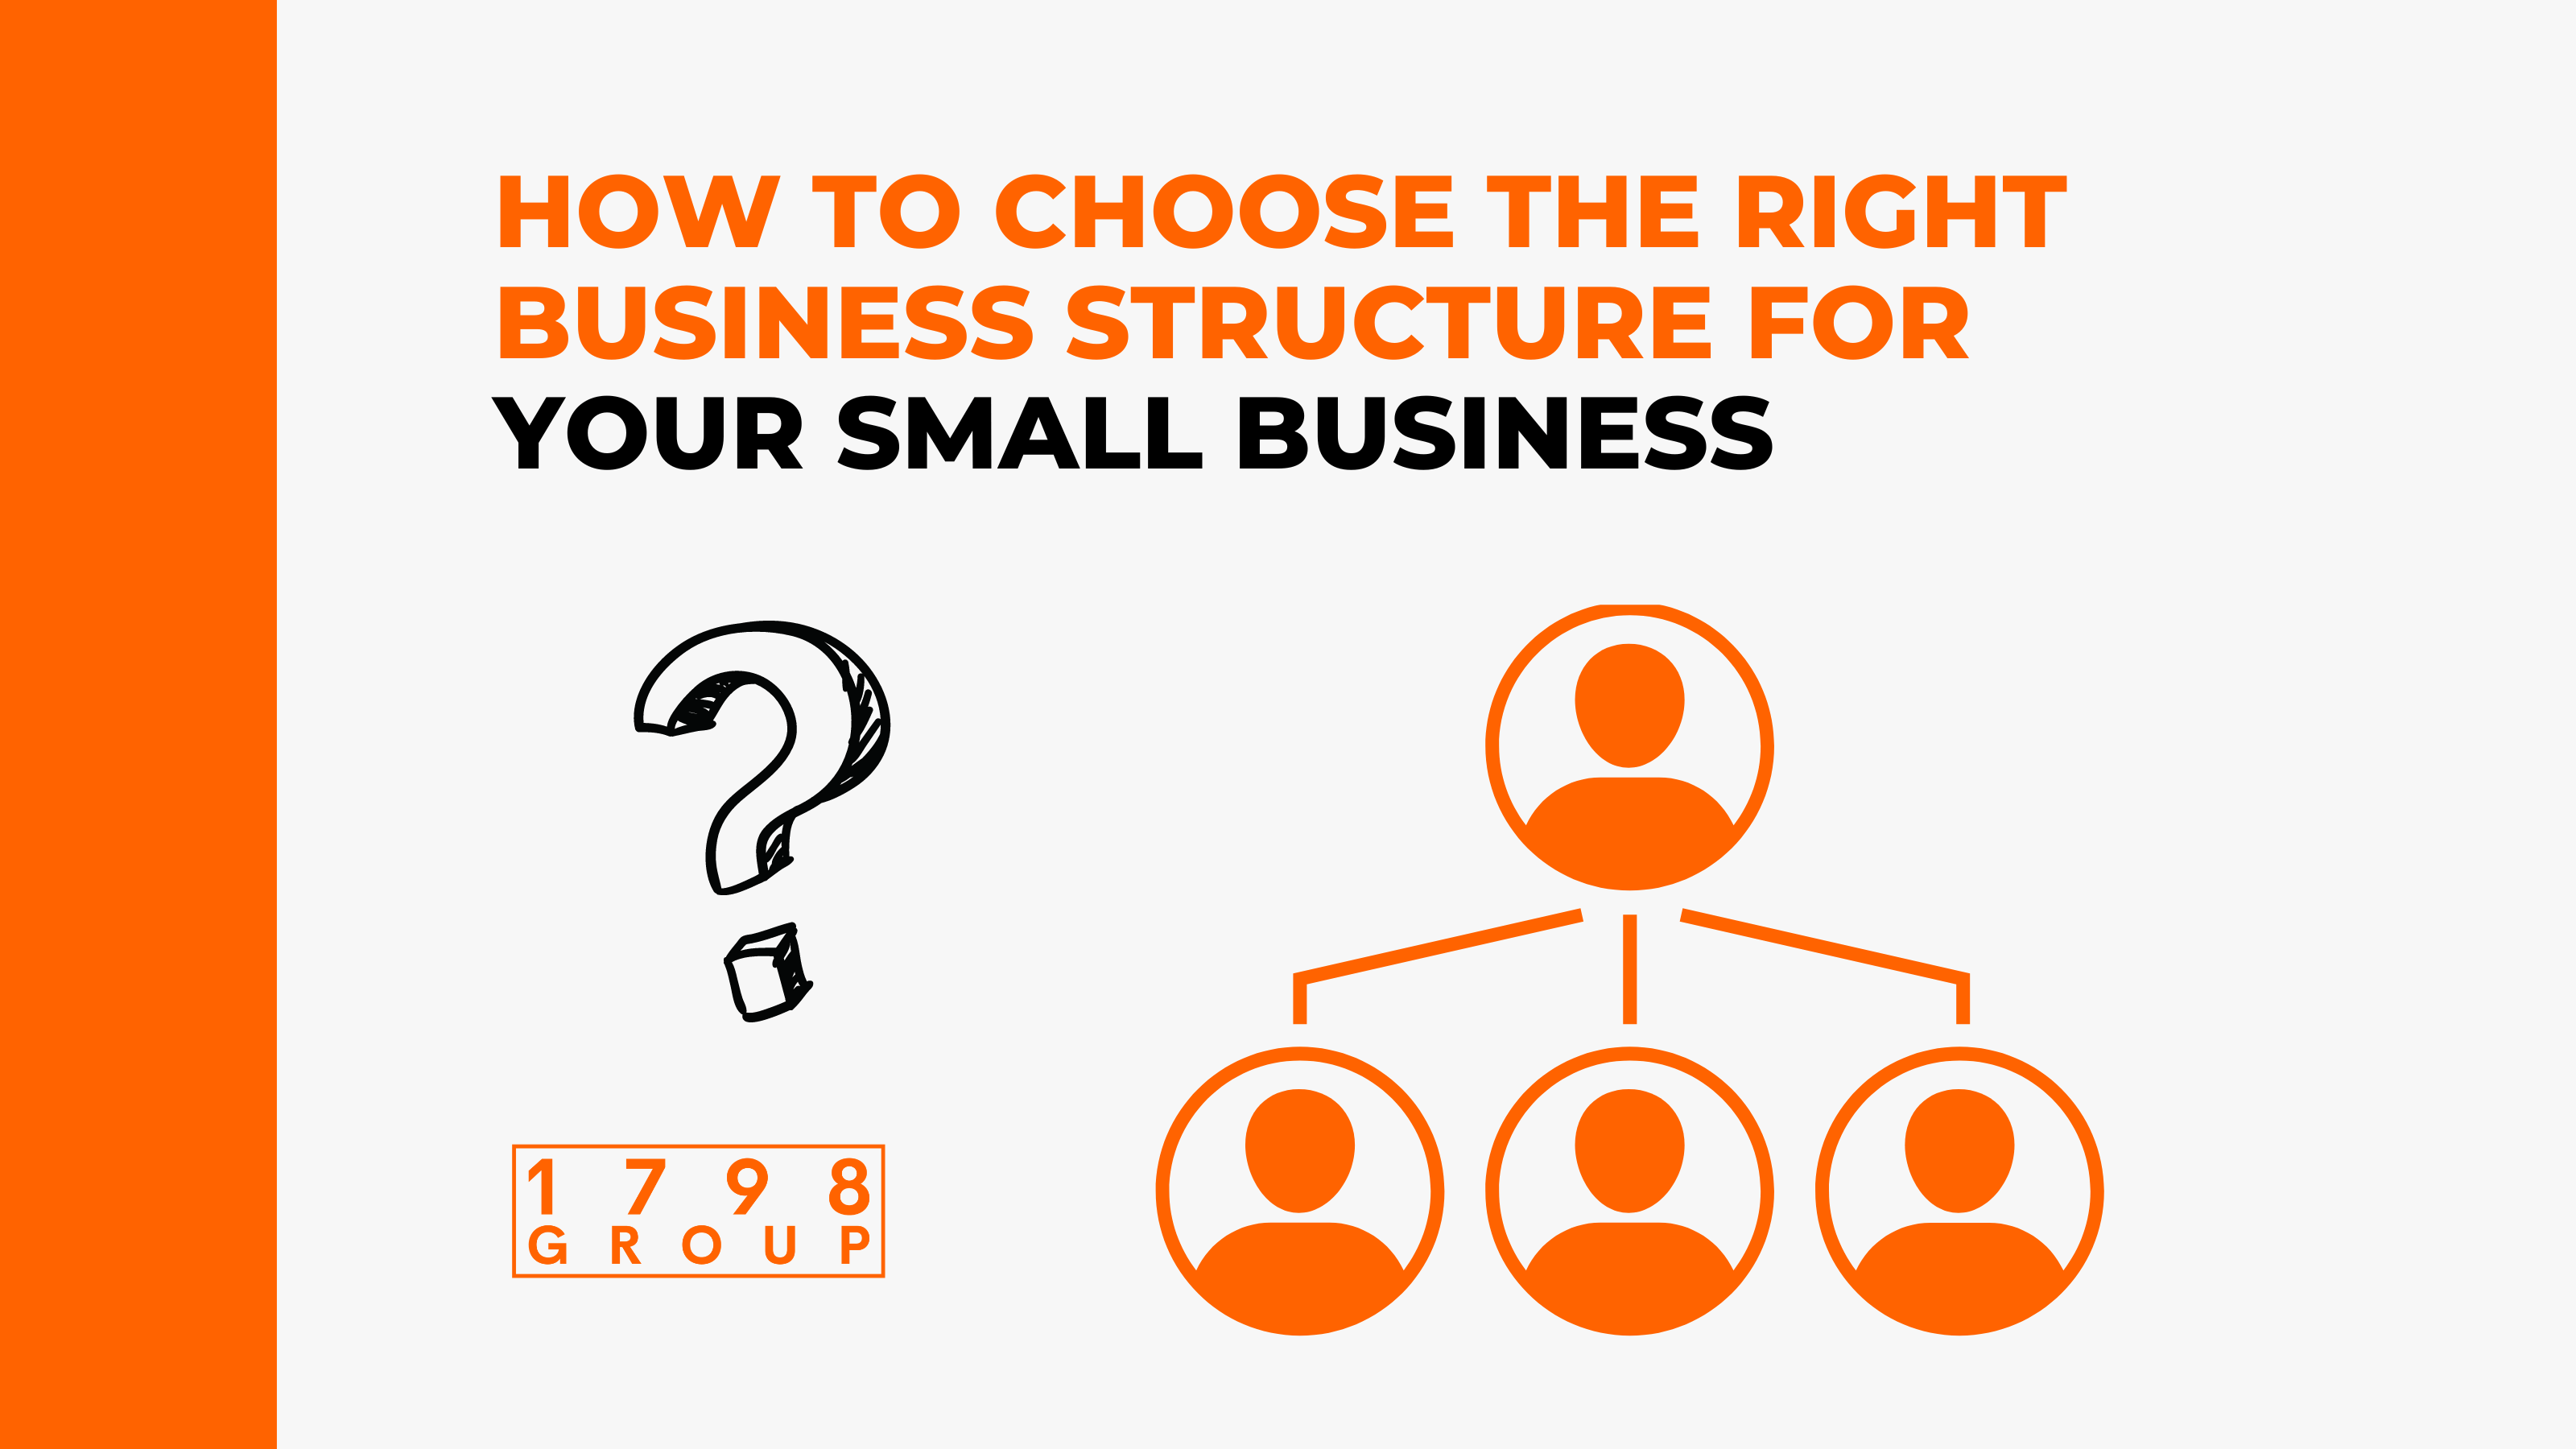 How to Choose the Right Business Structure for Your Small Business